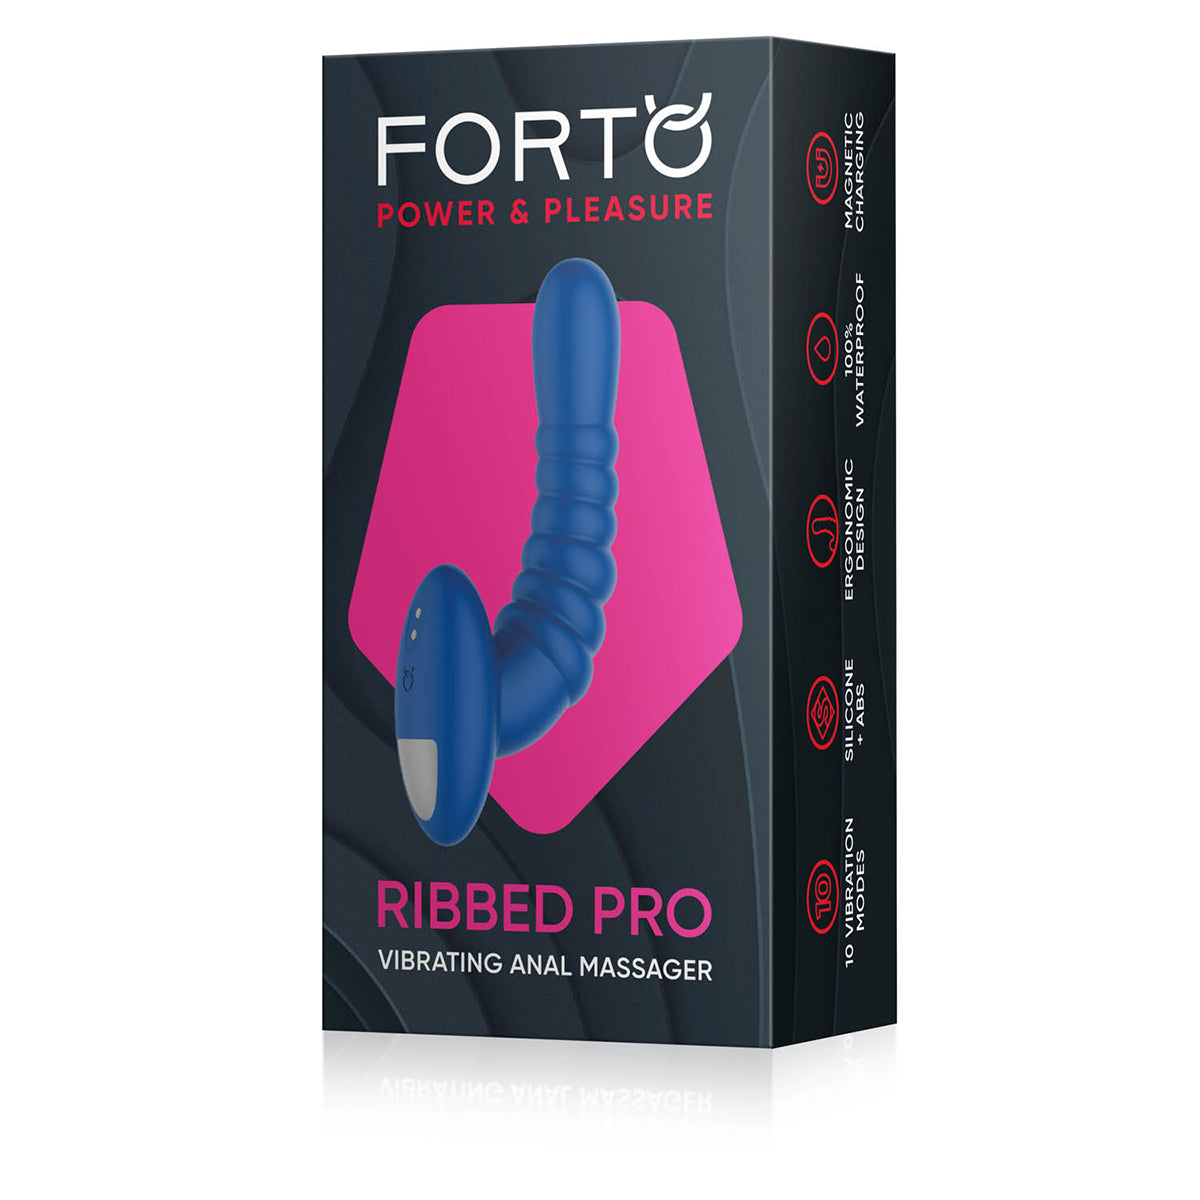 Forto Ribbed Pro Rechargeable Silicone Vibrating Anal Massager Blue - Zateo Joy